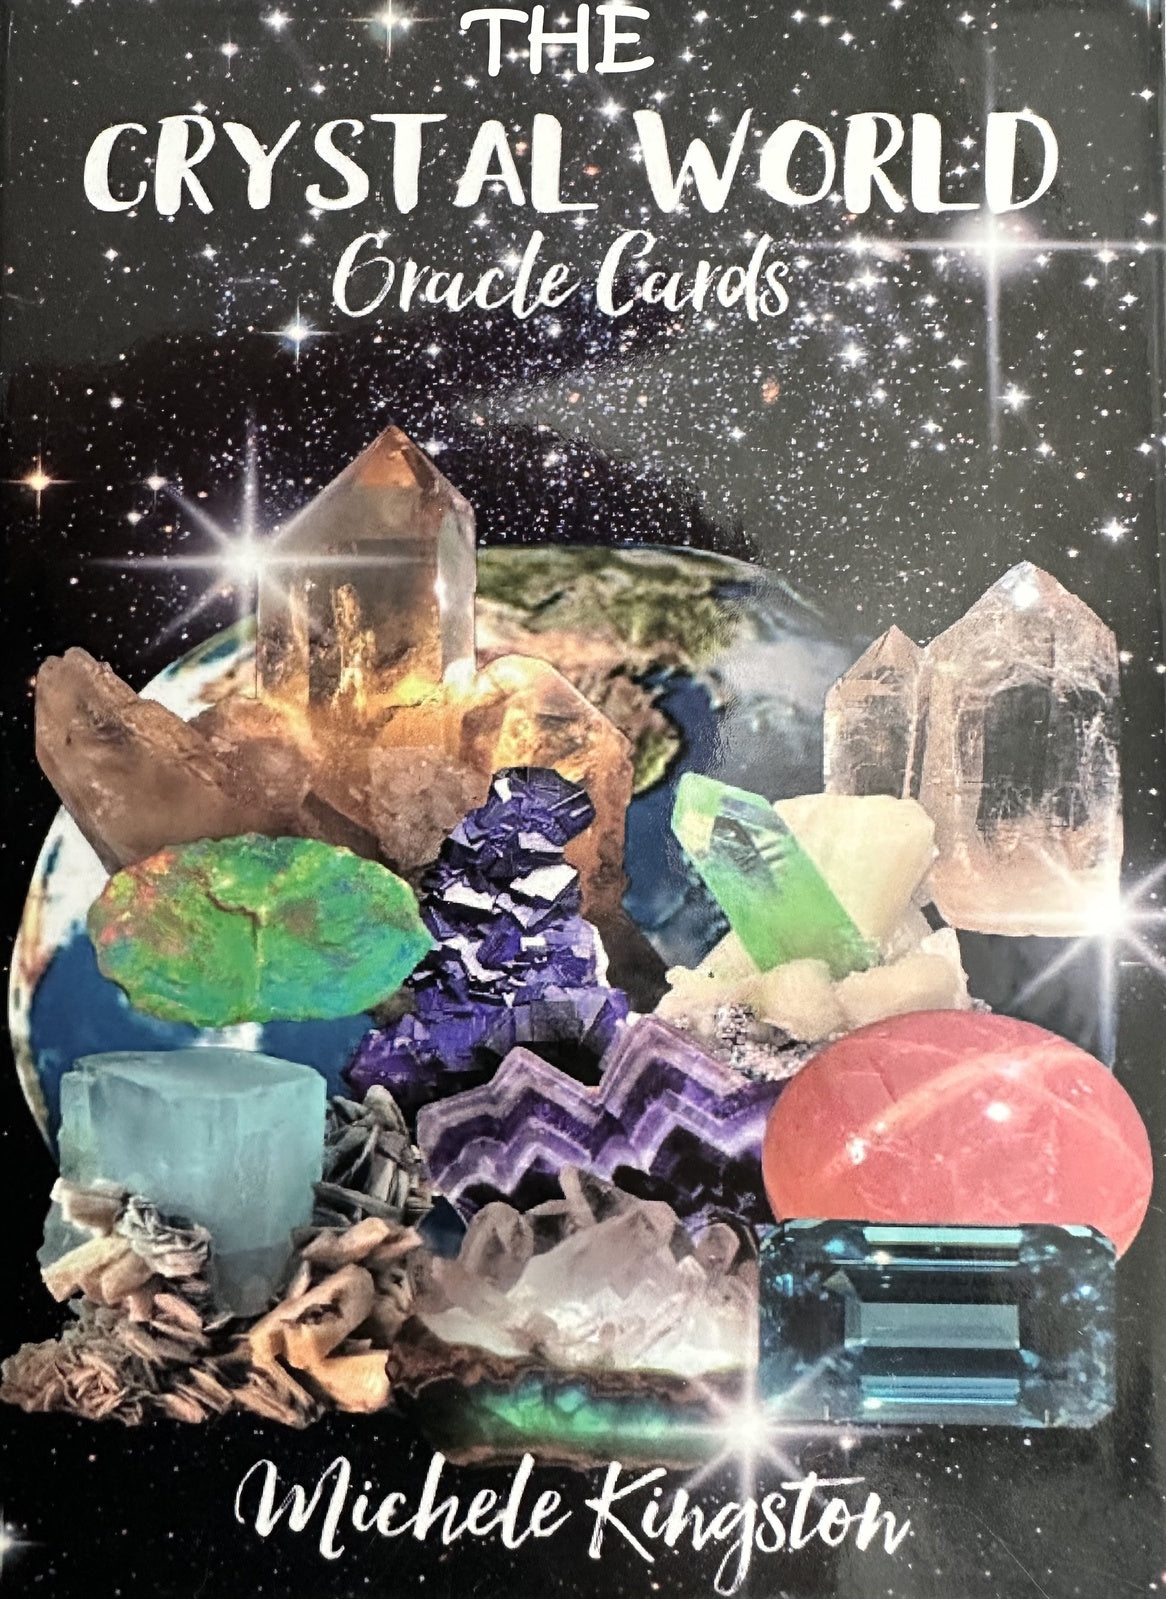 The crystal World Oracle Cards by Michele Kingston